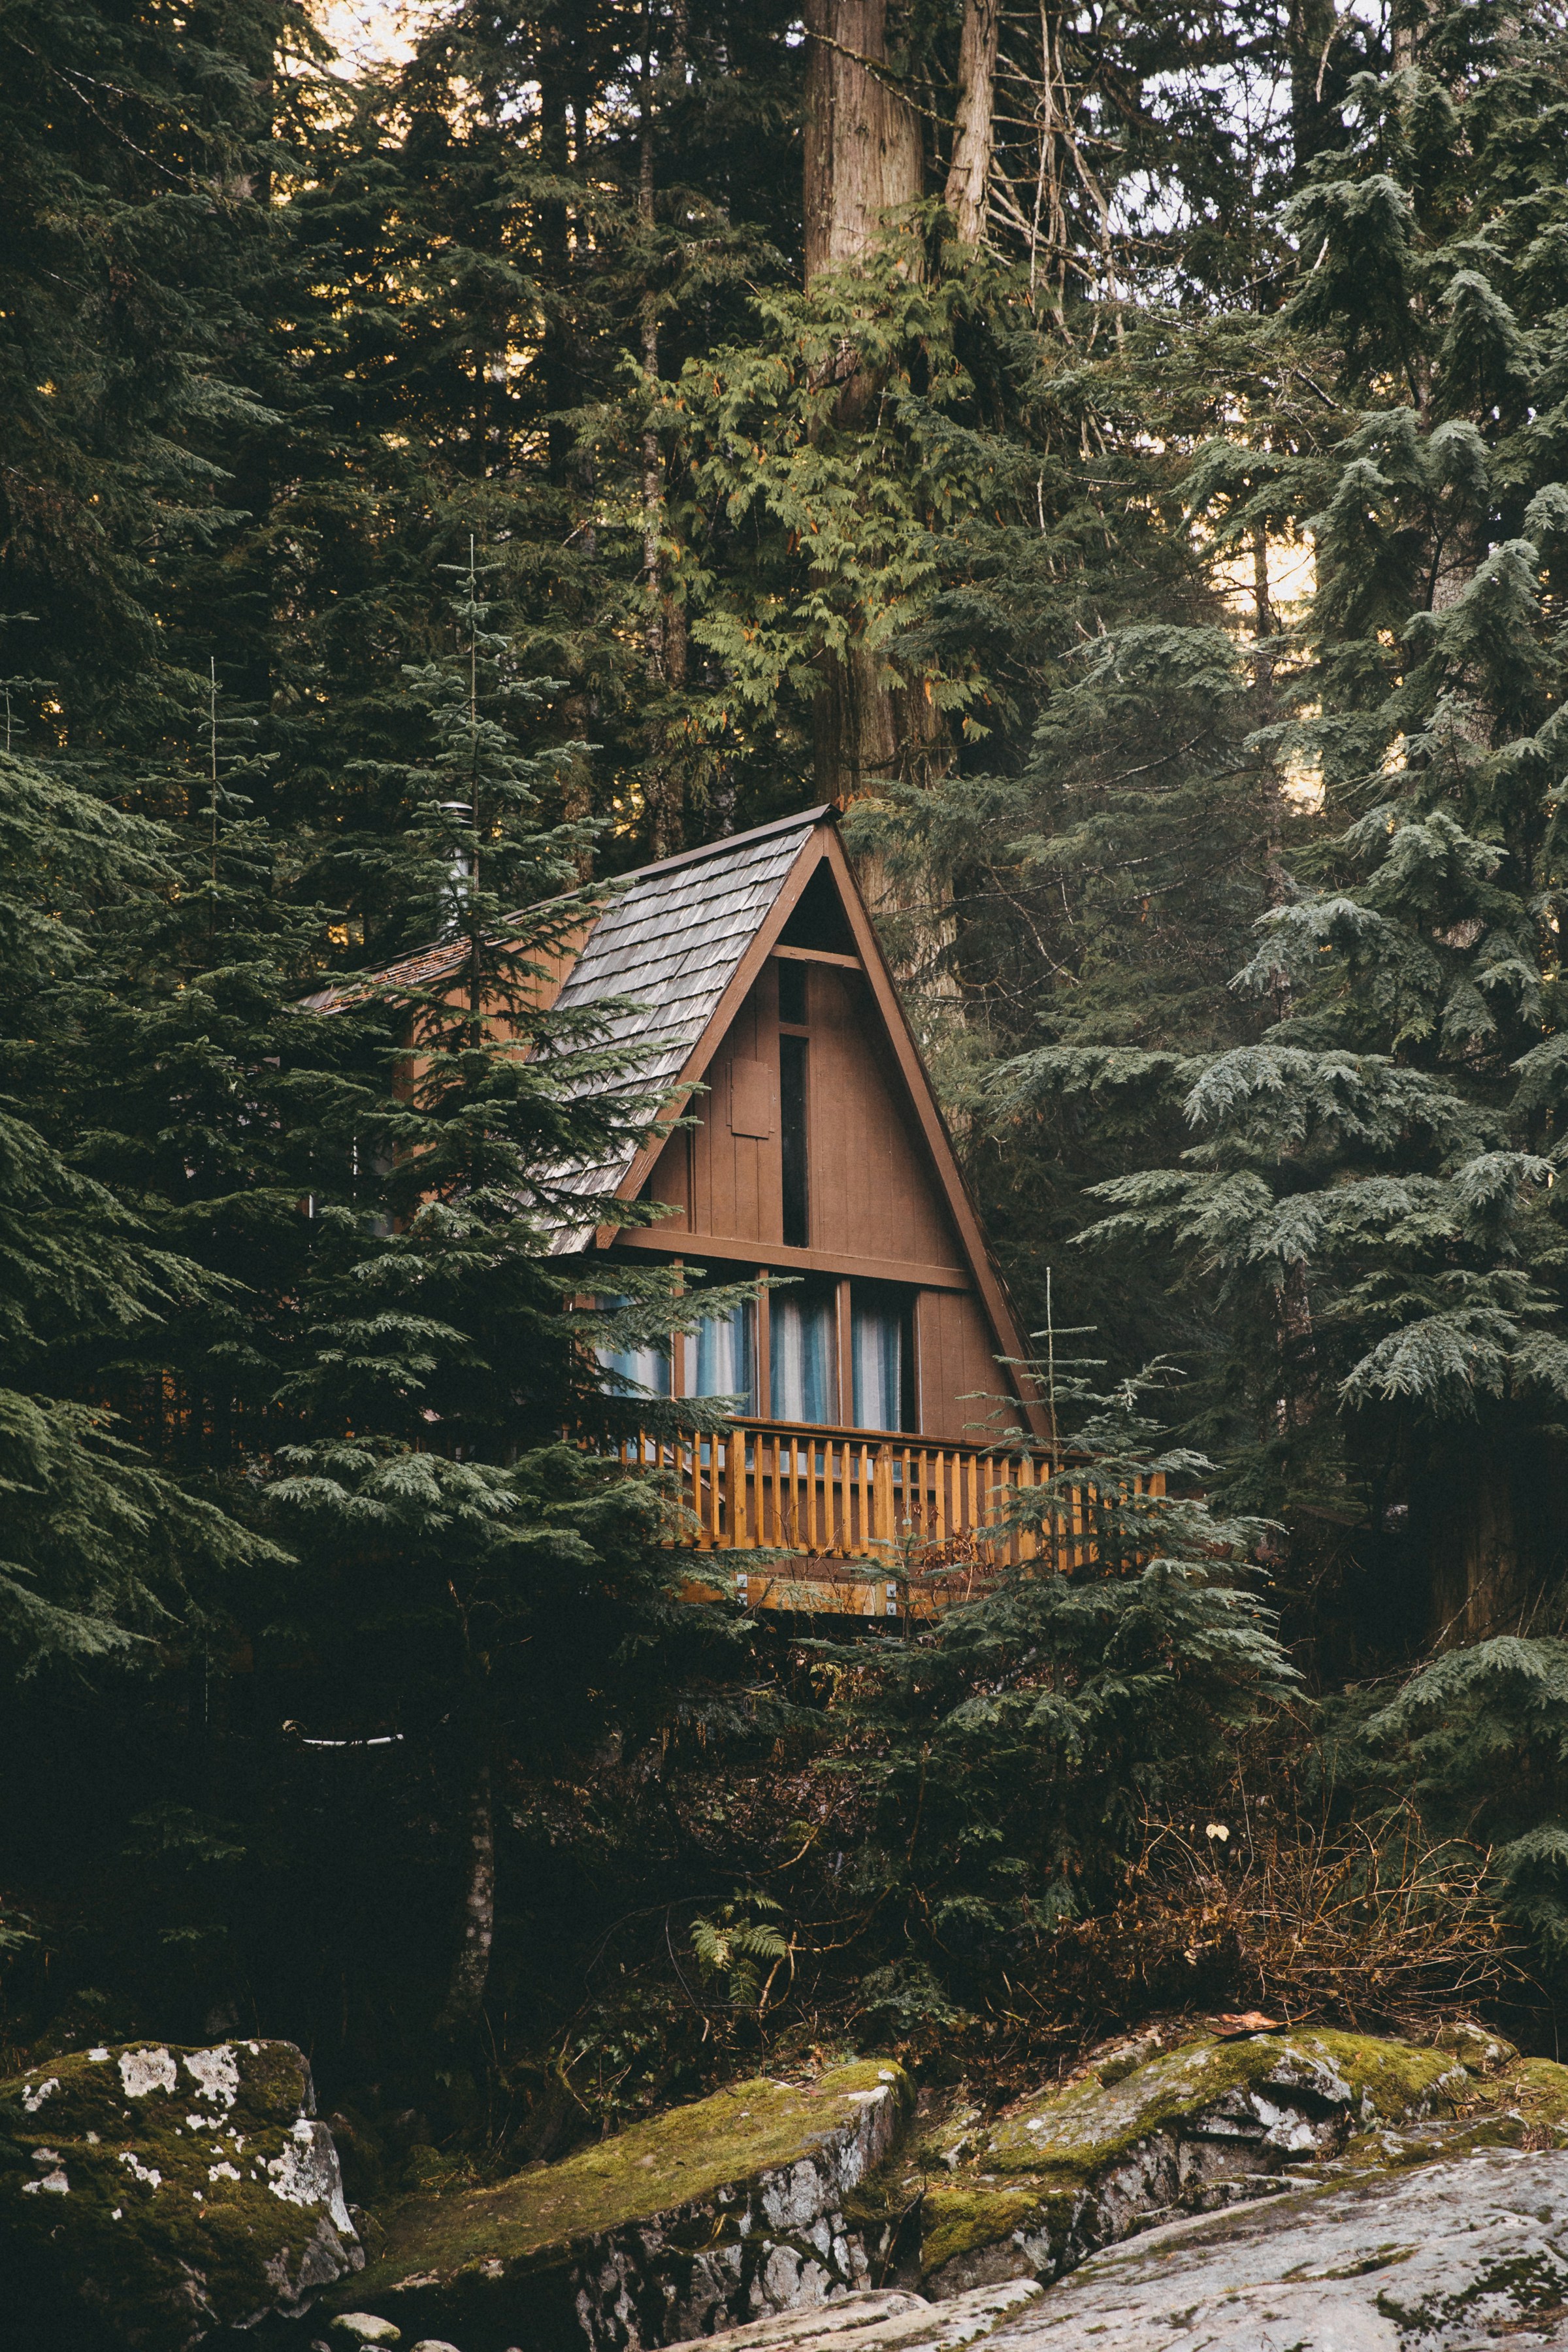 A cabin in the woods | Source: Unsplash